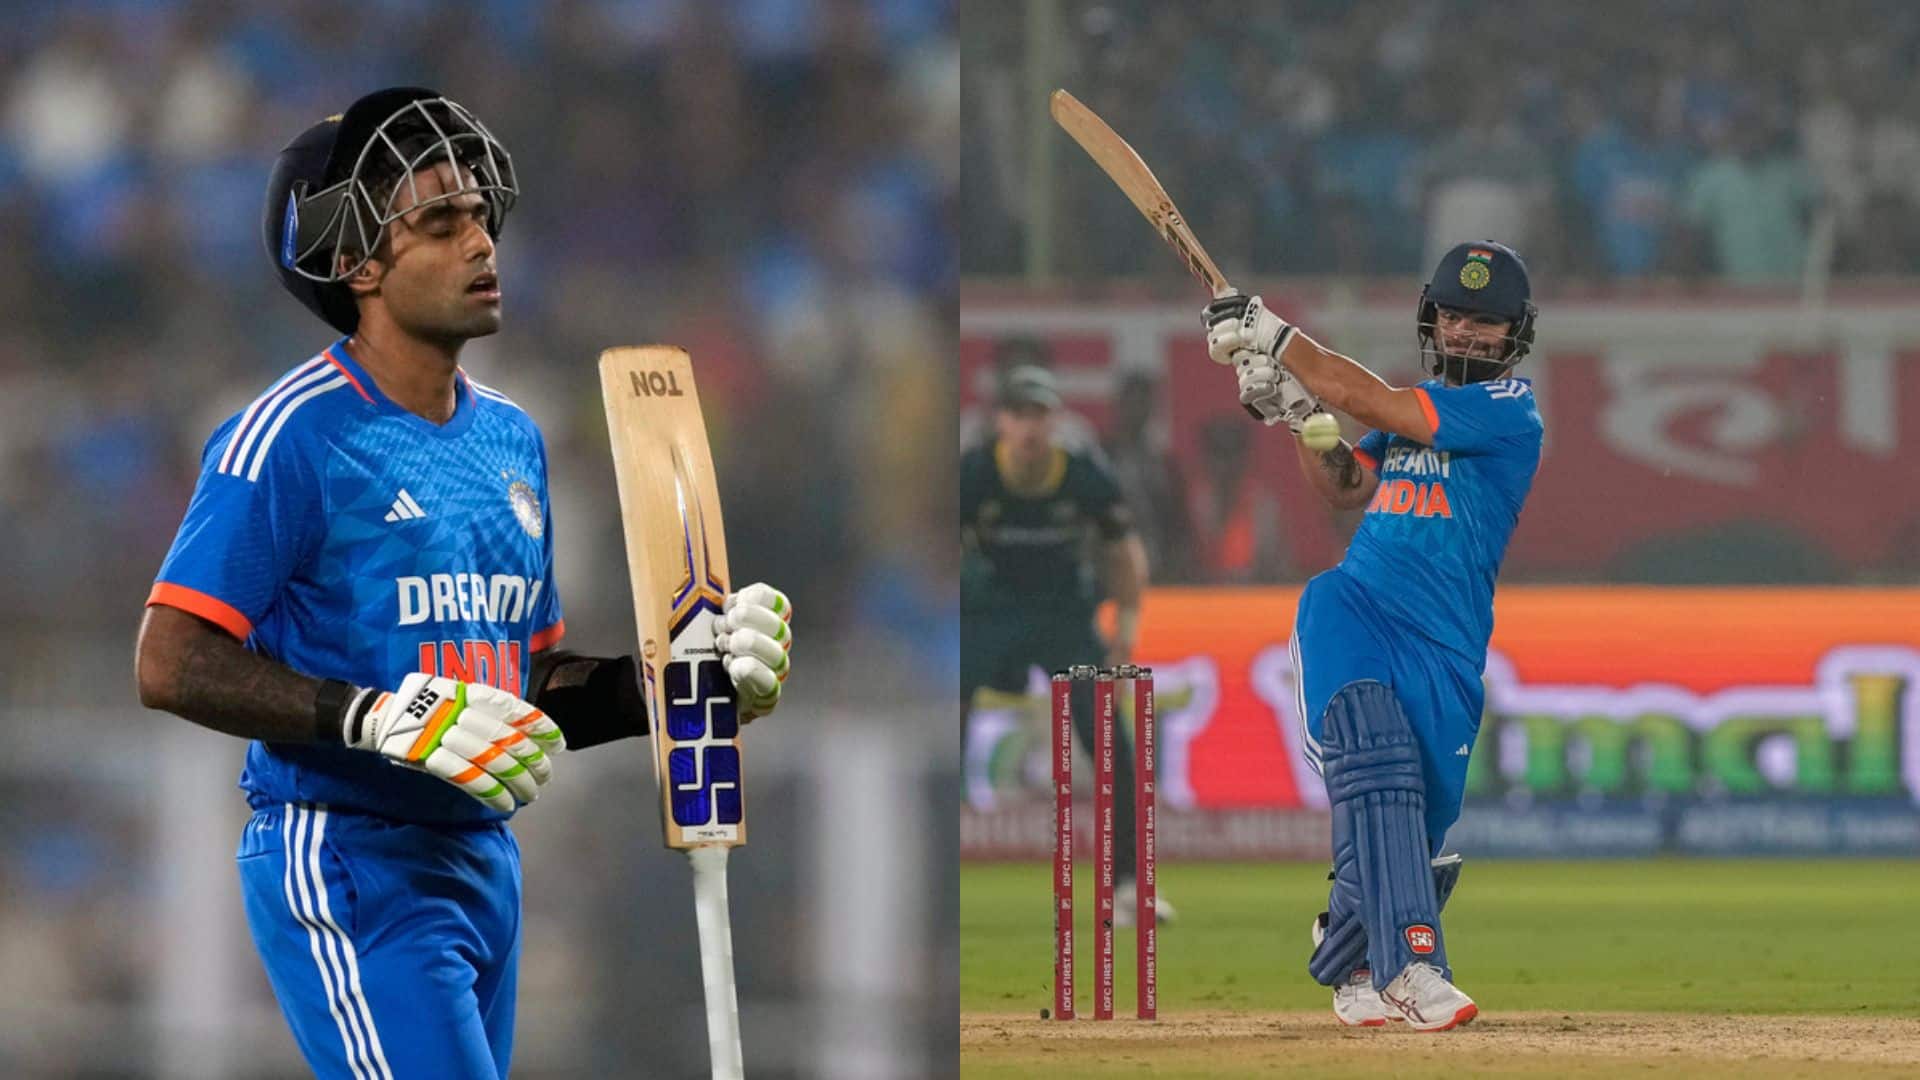 Kohli Rested; Suryakumar Yadav Out, Rinku Singh In? Here's India's Squad For South Africa ODIs